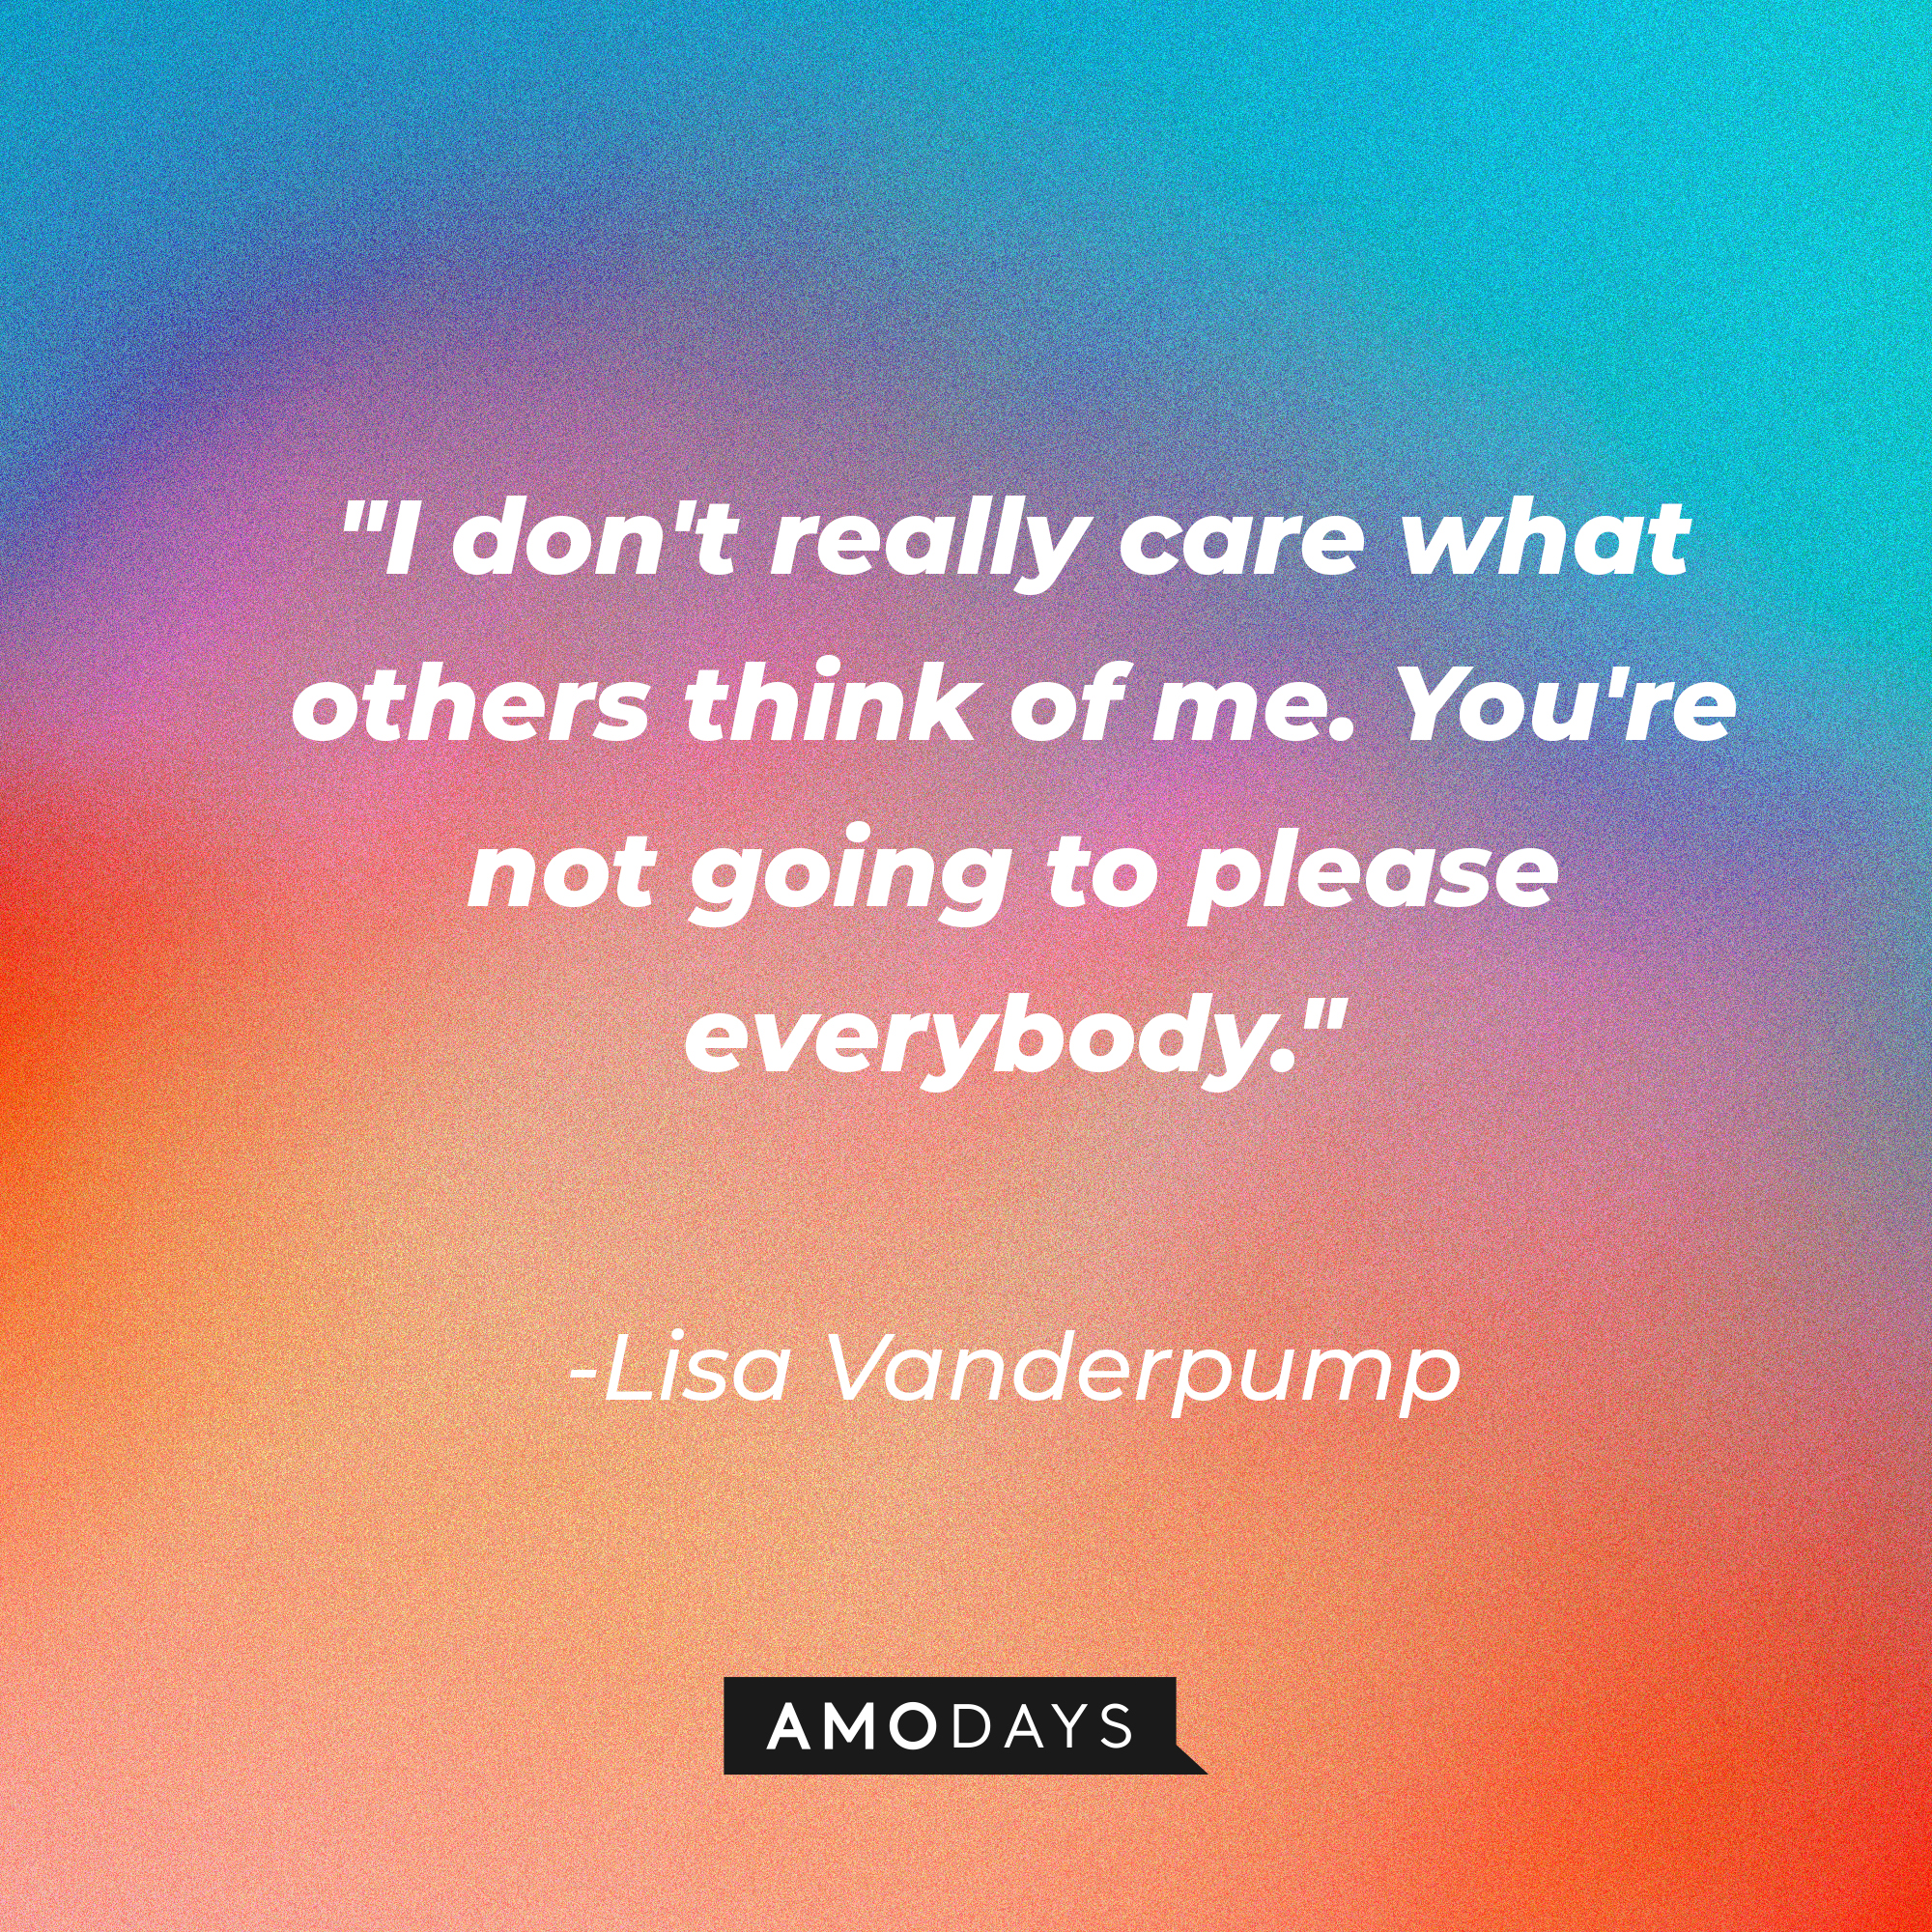 Lisa Vanderpump’s quote:“I don't really care what others think of me. You're not going to please everybody.” | Source: AmoDays